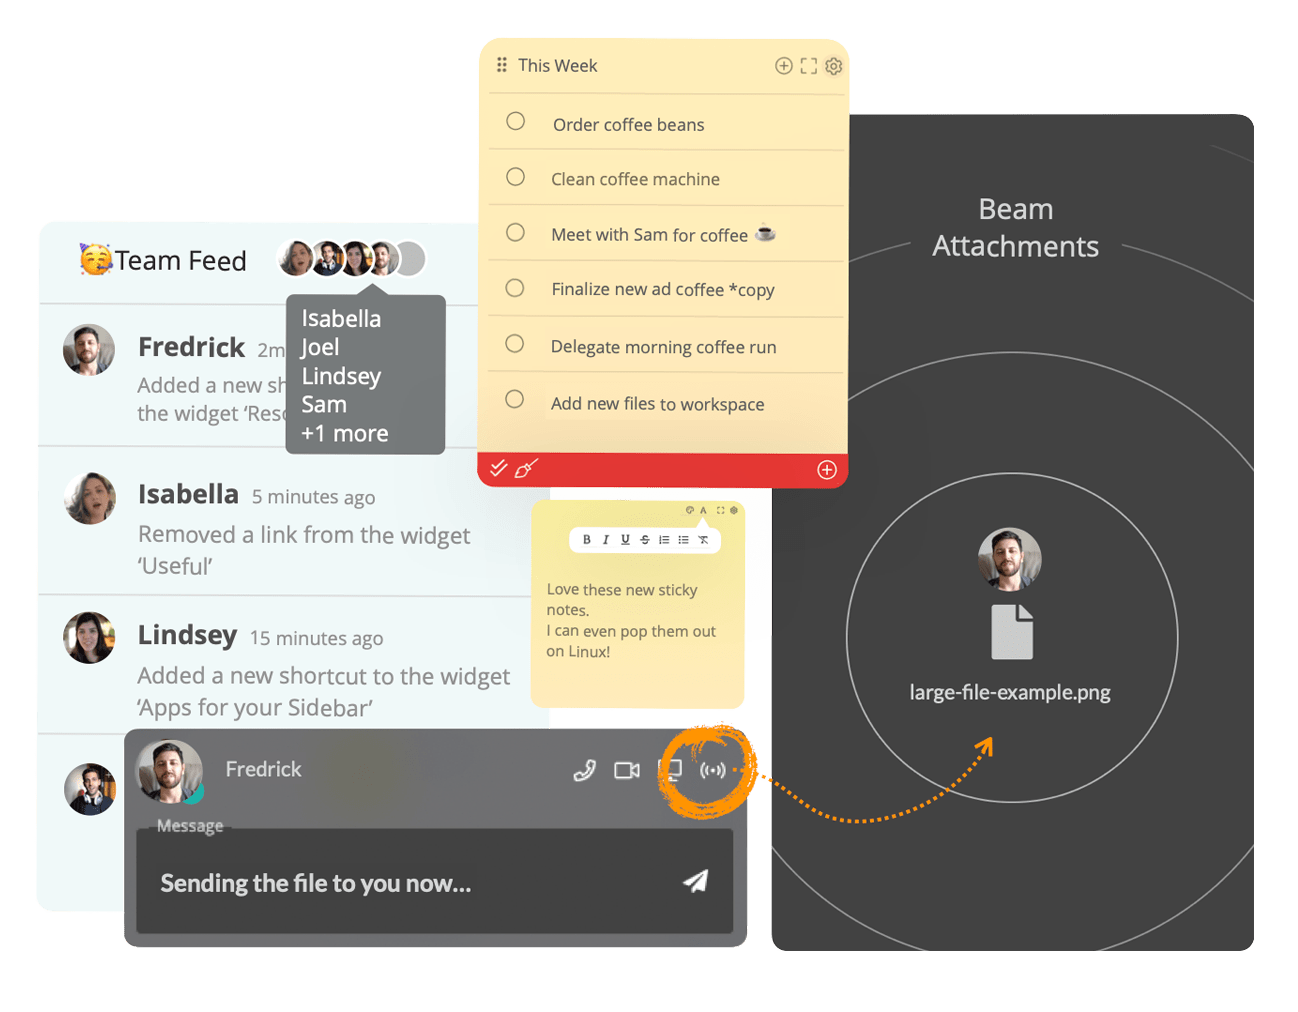 Over 20 extension-style widgets for workspaces